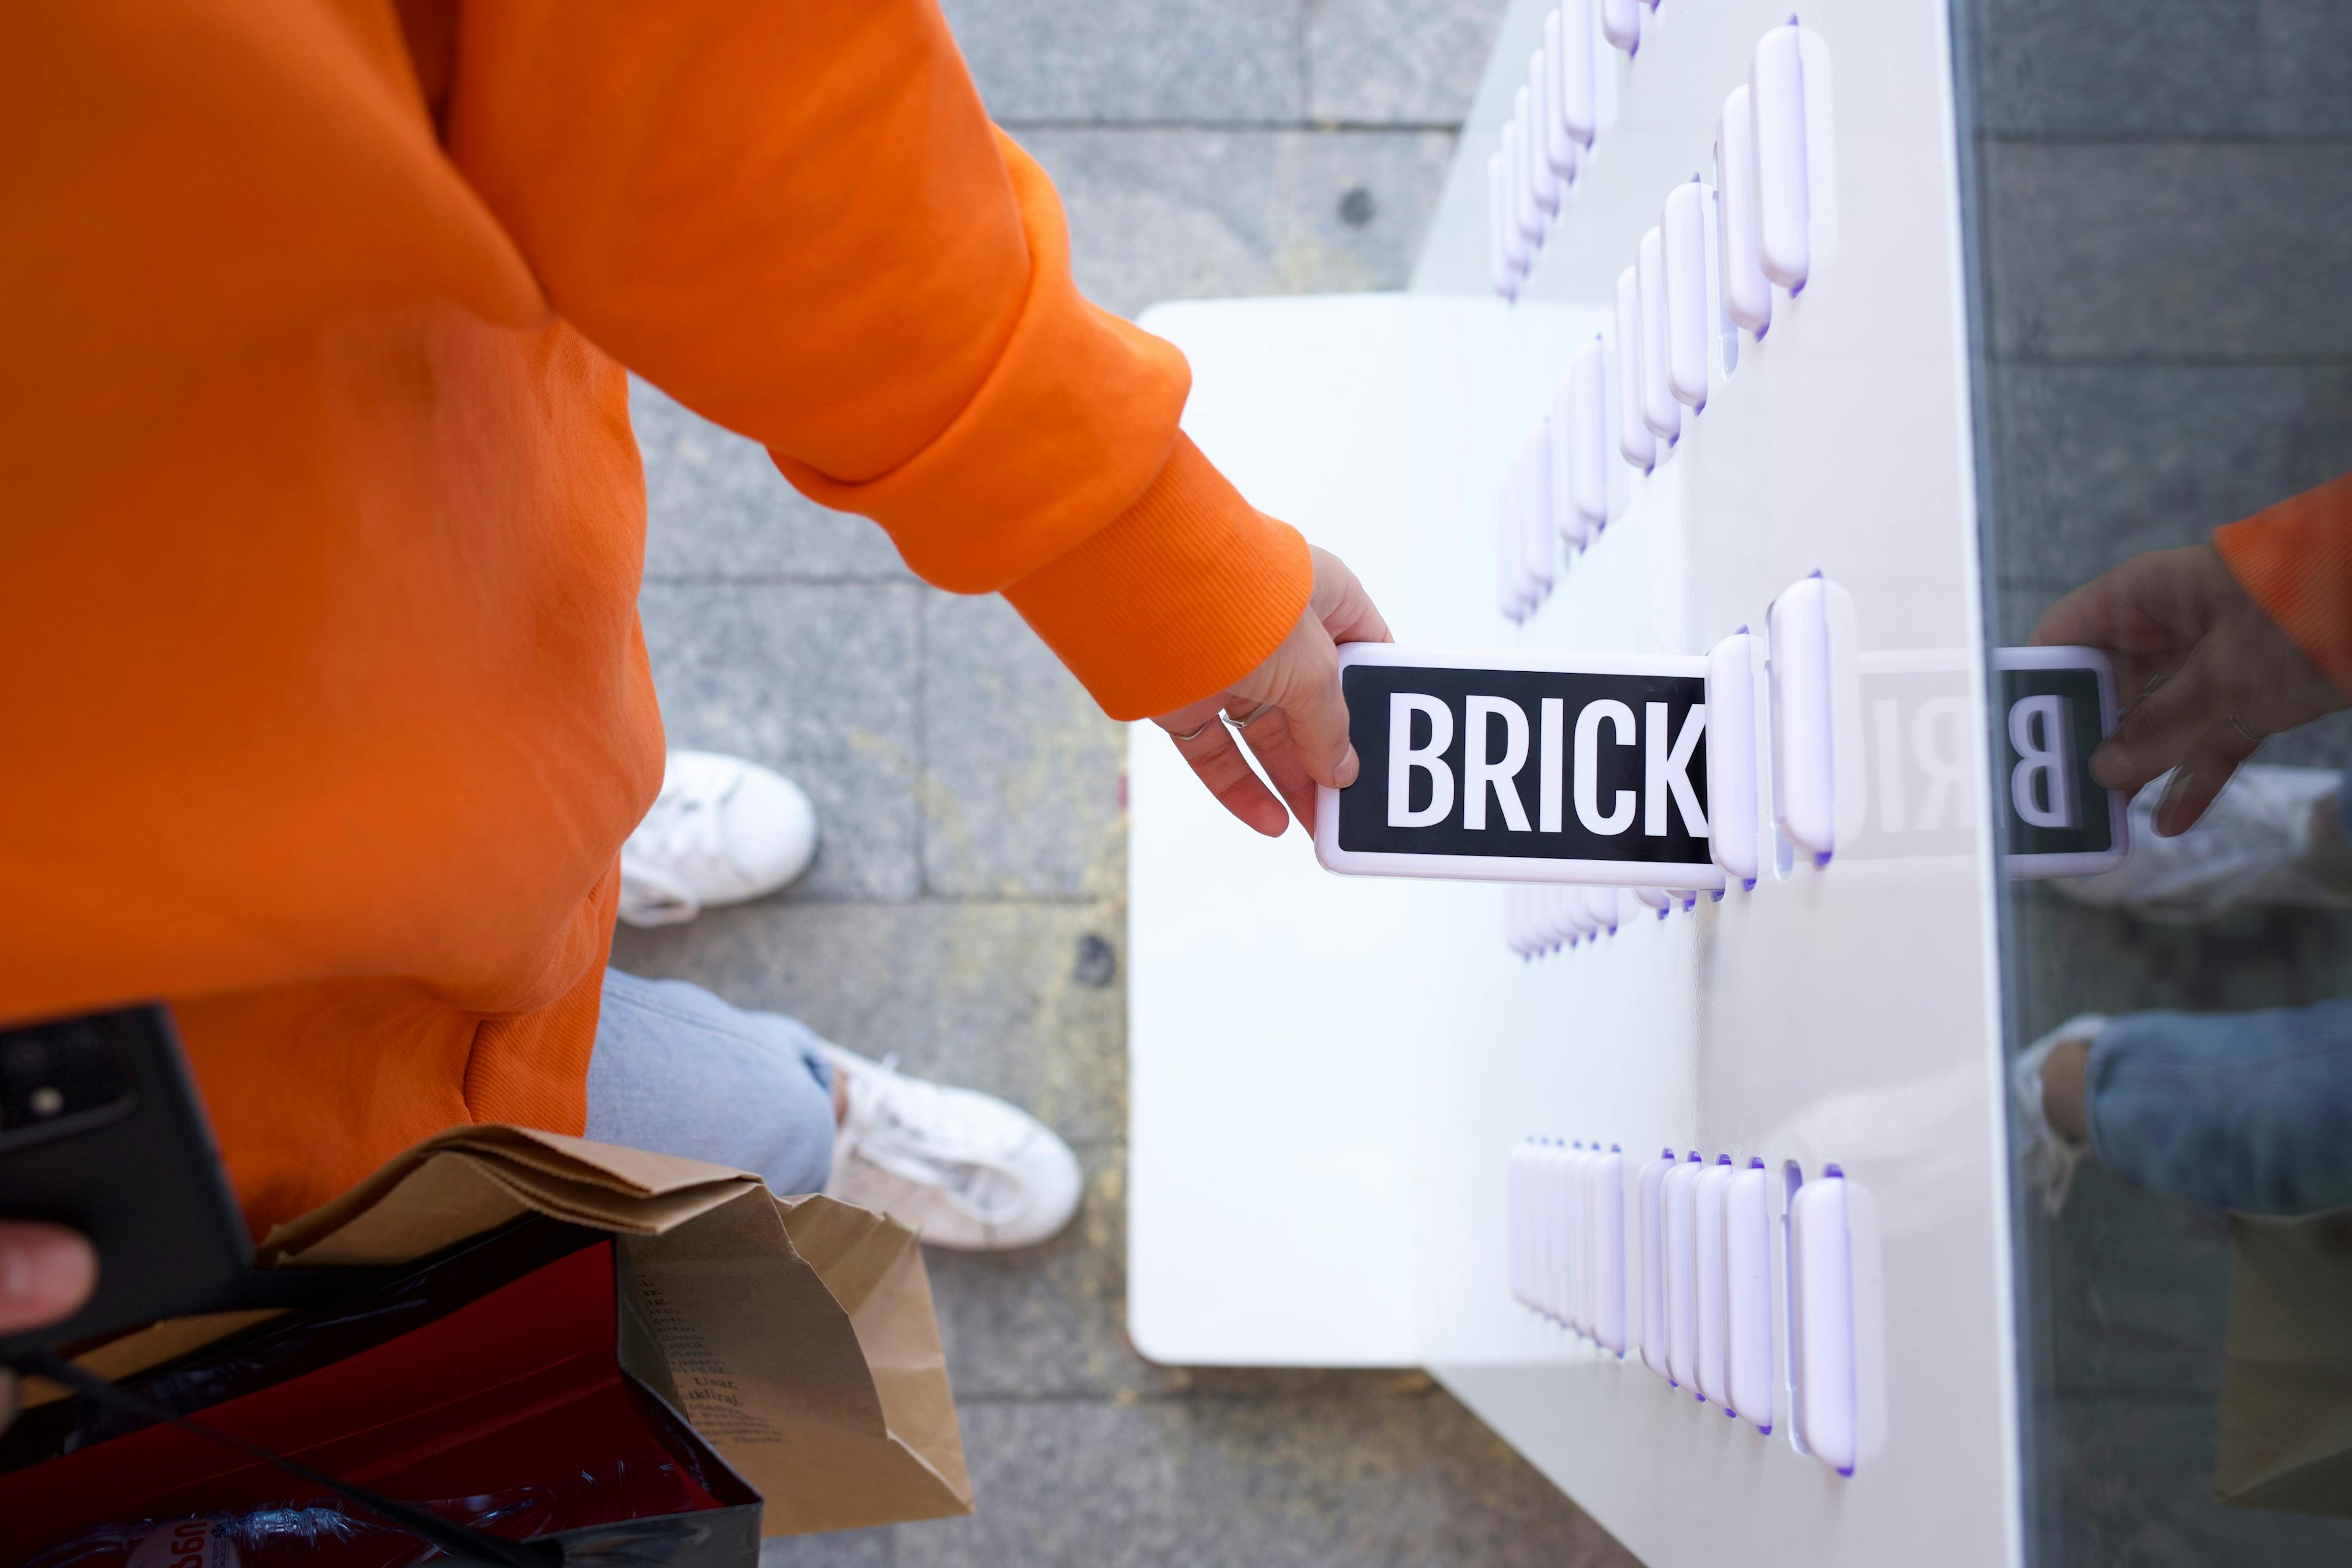 A hand retrieving a Brick power bank from a station